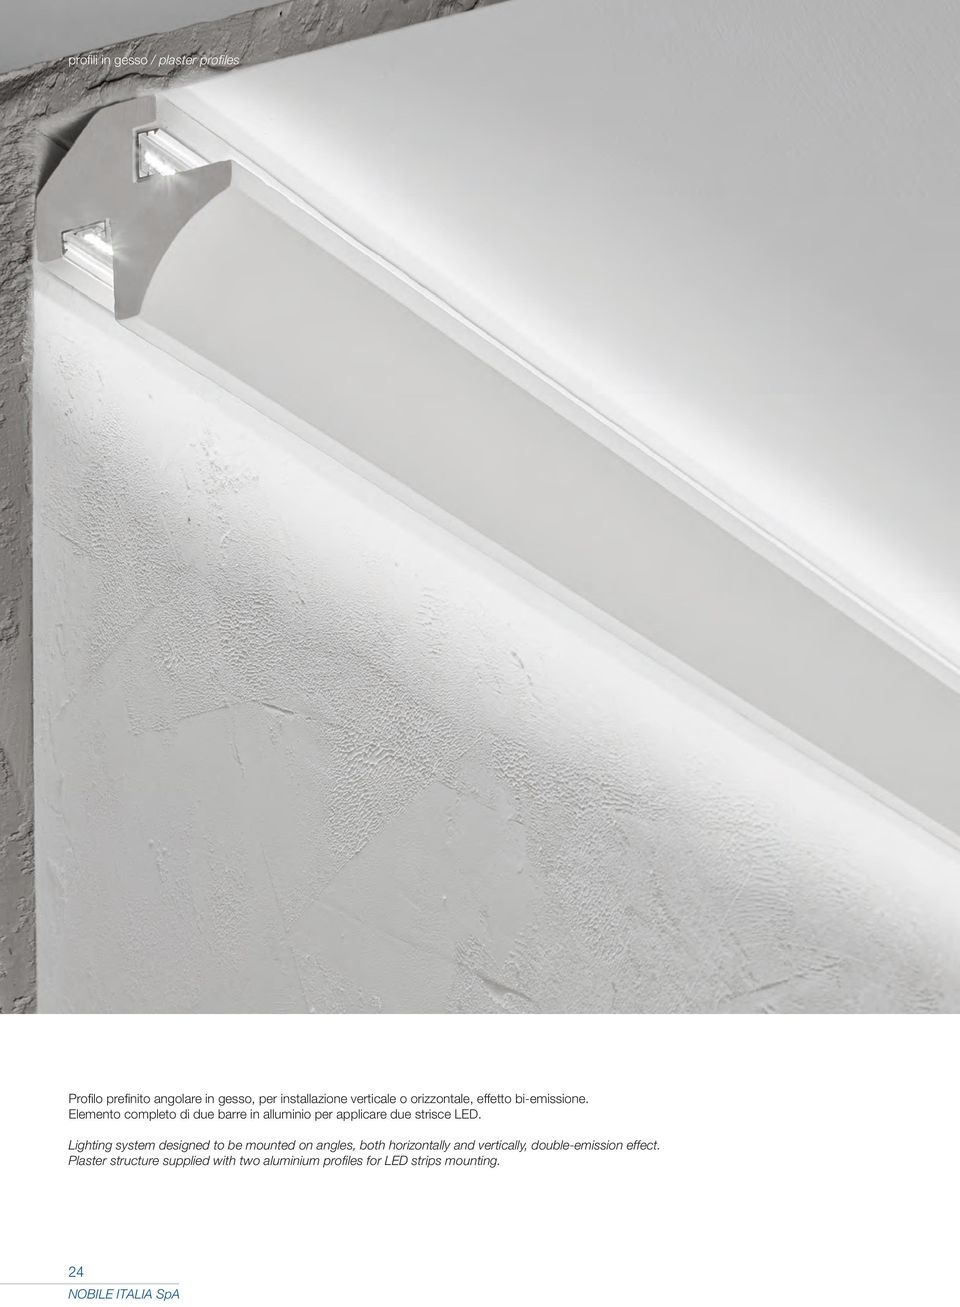 Lighting system designed to be mounted on angles, both horizontally and vertically,